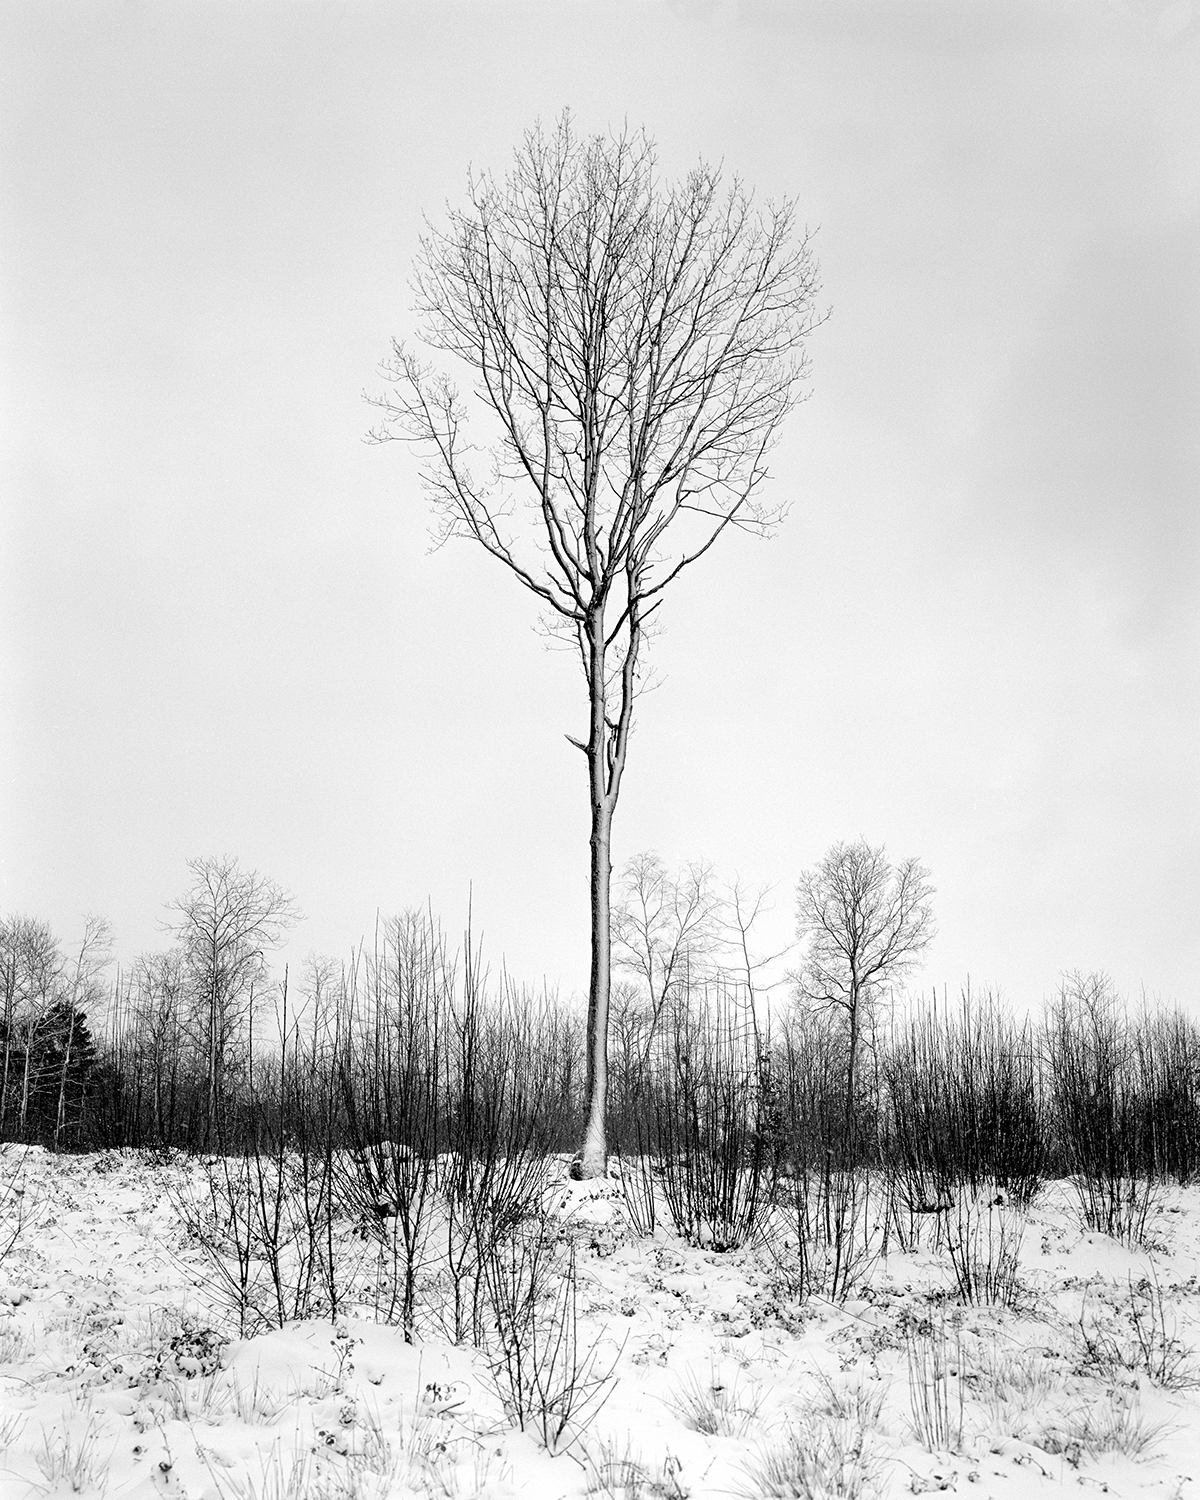 Lone tree in the cold [Shen Hao TZ45-11, Nikkor SW 90mm f8 - Ilford HP5+]